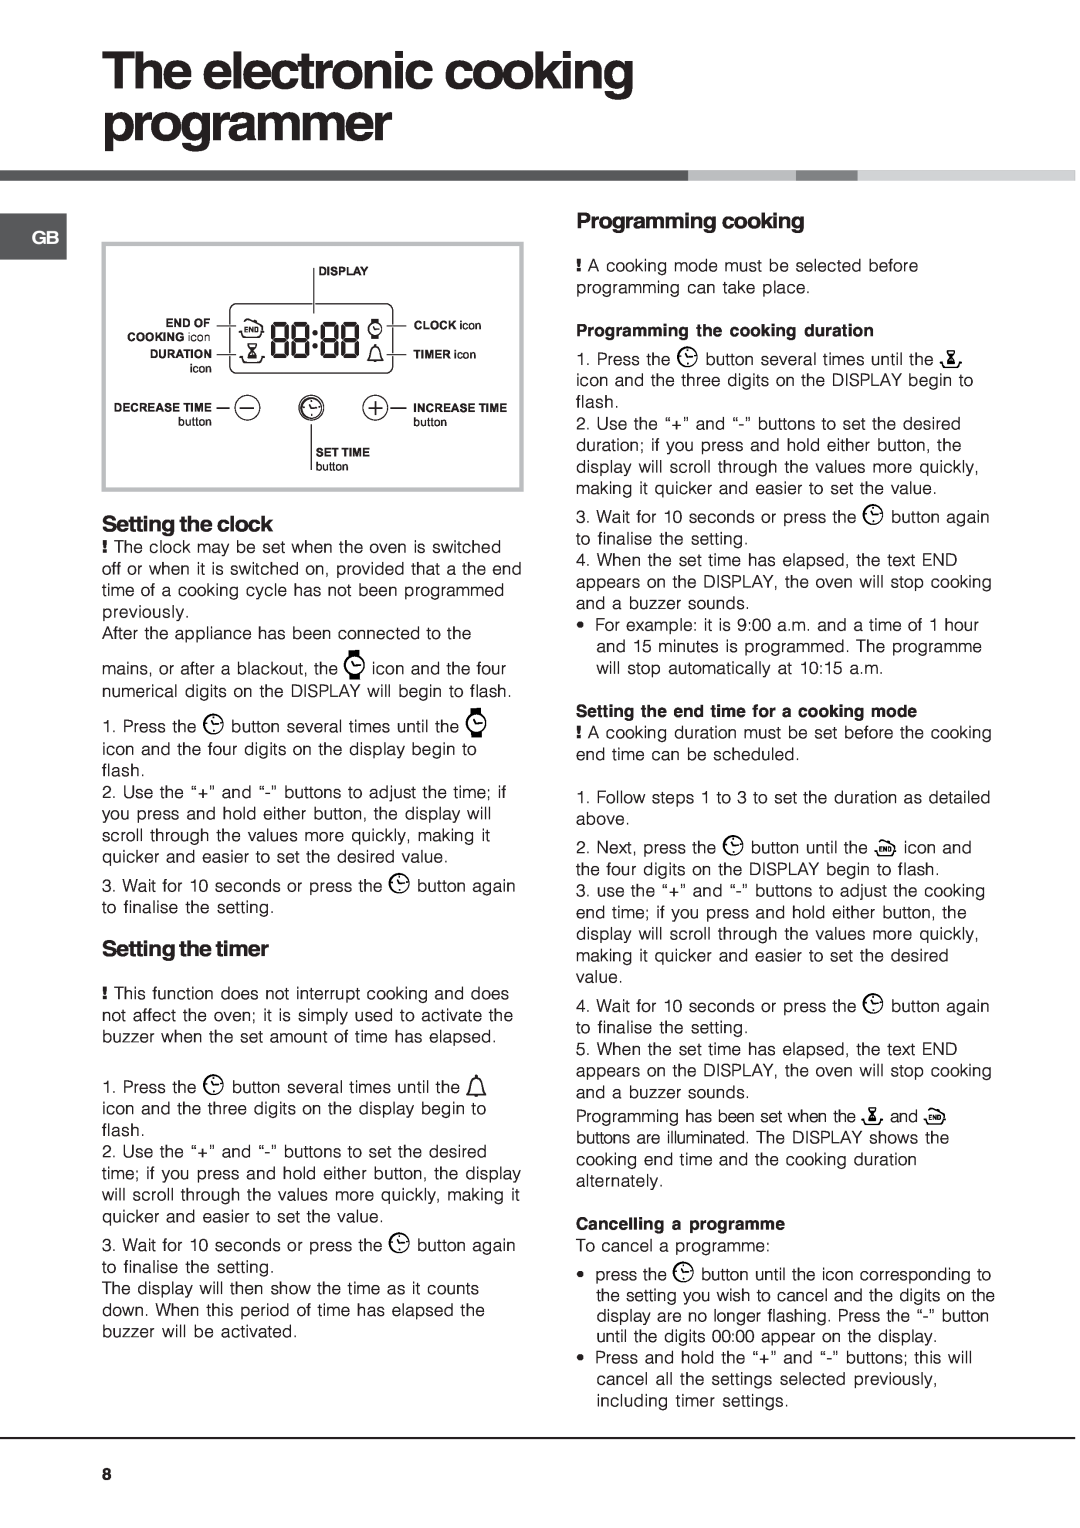 Hotpoint SN56EX operating instructions The electronic cooking programmer 